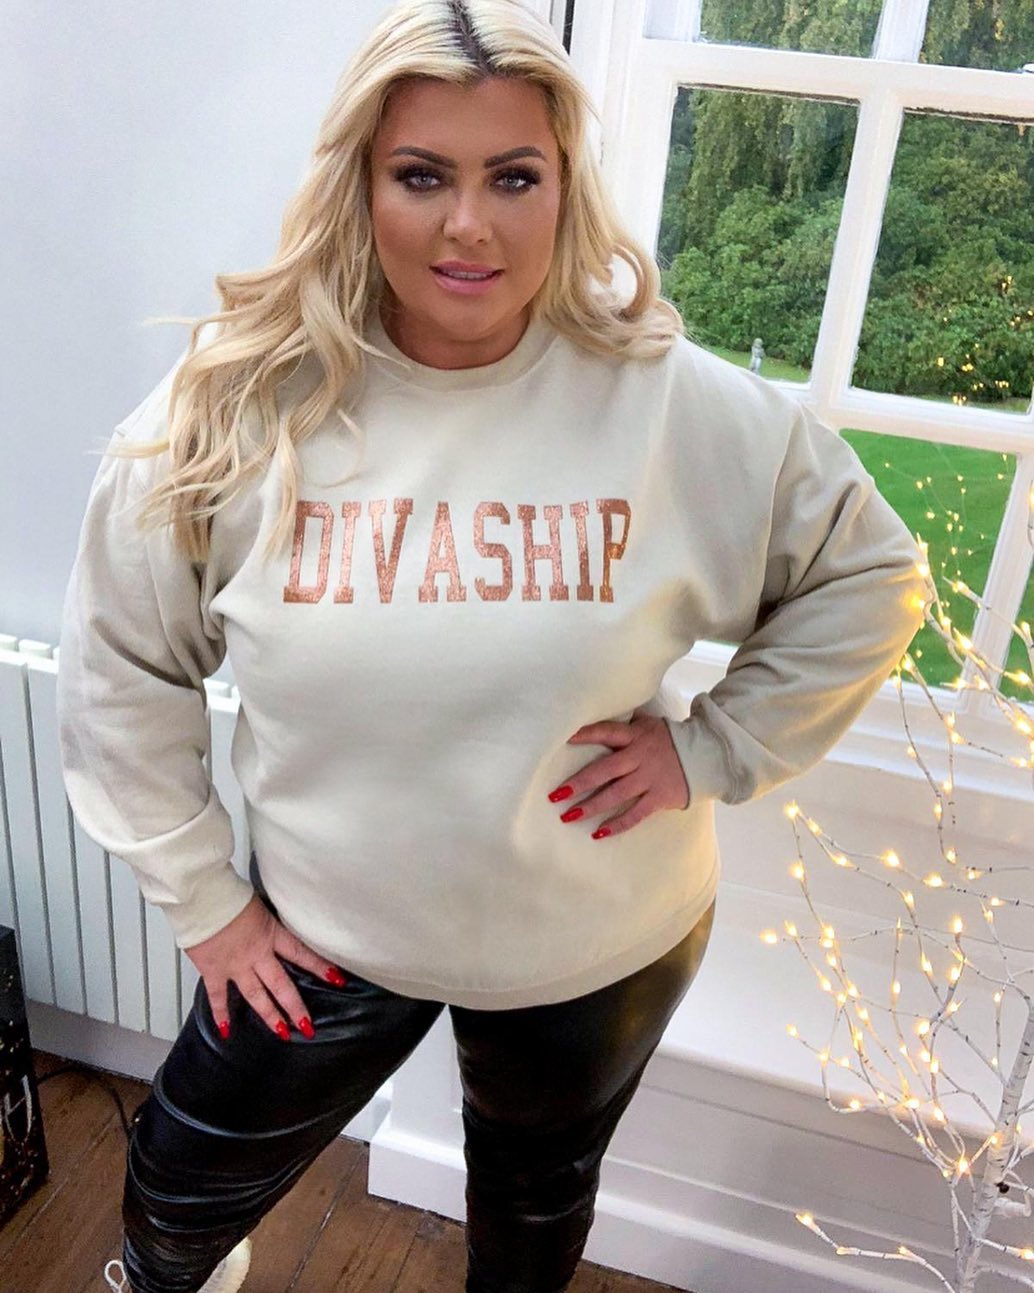 Gemma has used a combination of diet, exercise and appetite suppressants to help her shift the weight